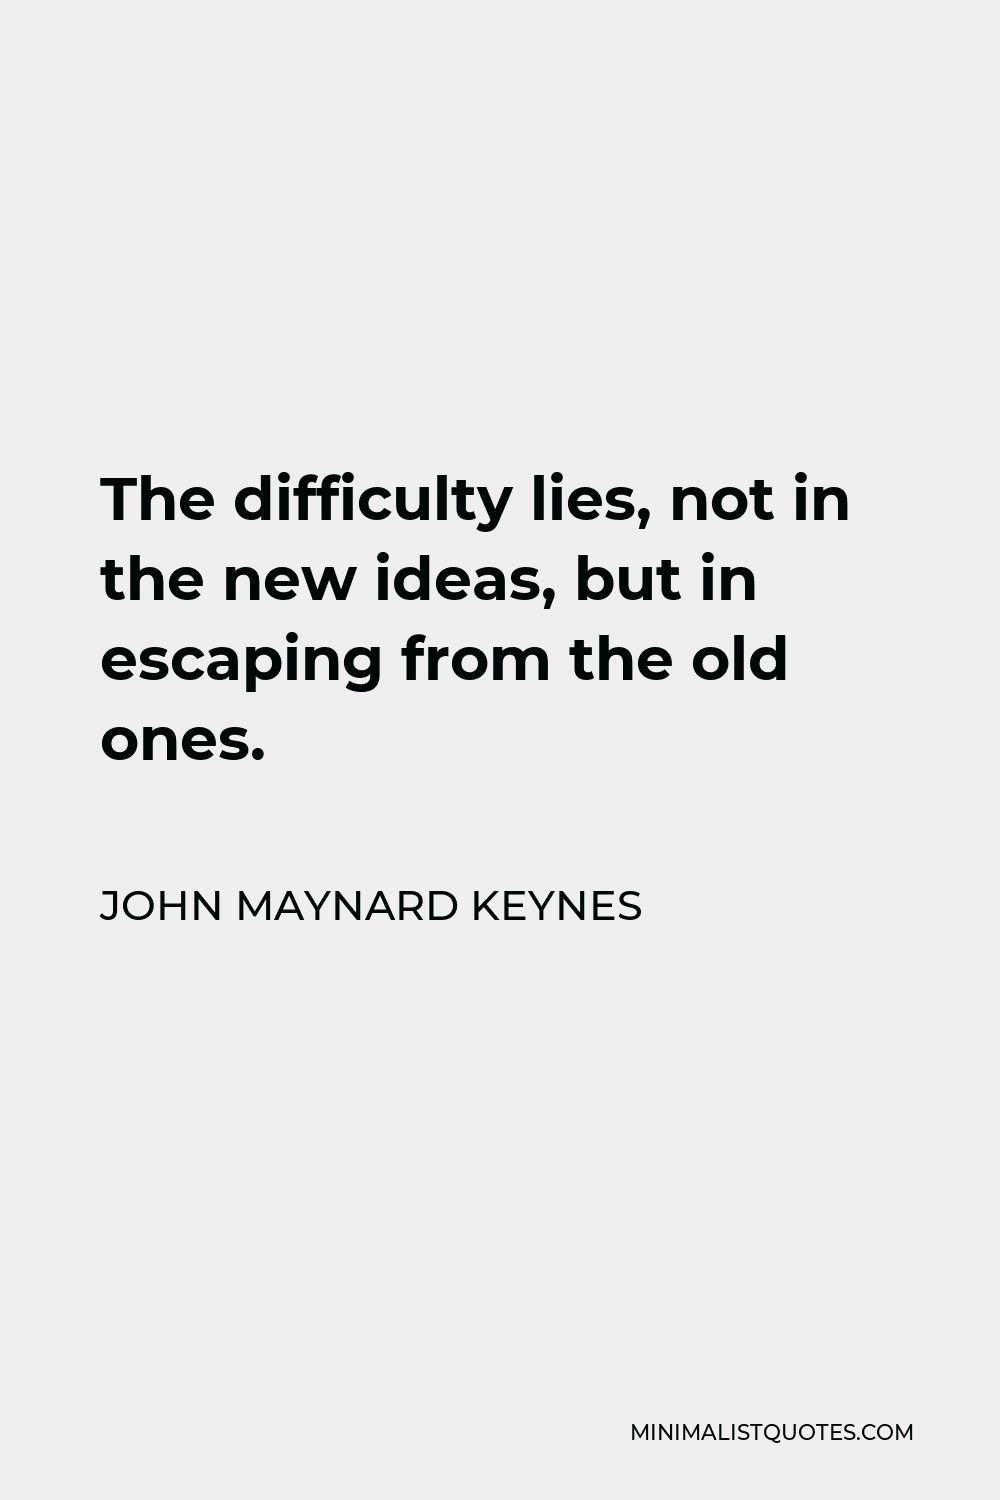 John Maynard Keynes Quote - The difficulty lies, not in the new ideas, but in escaping the old ones, which ramify, for those brought up as most of us have been, into every corner of our minds.